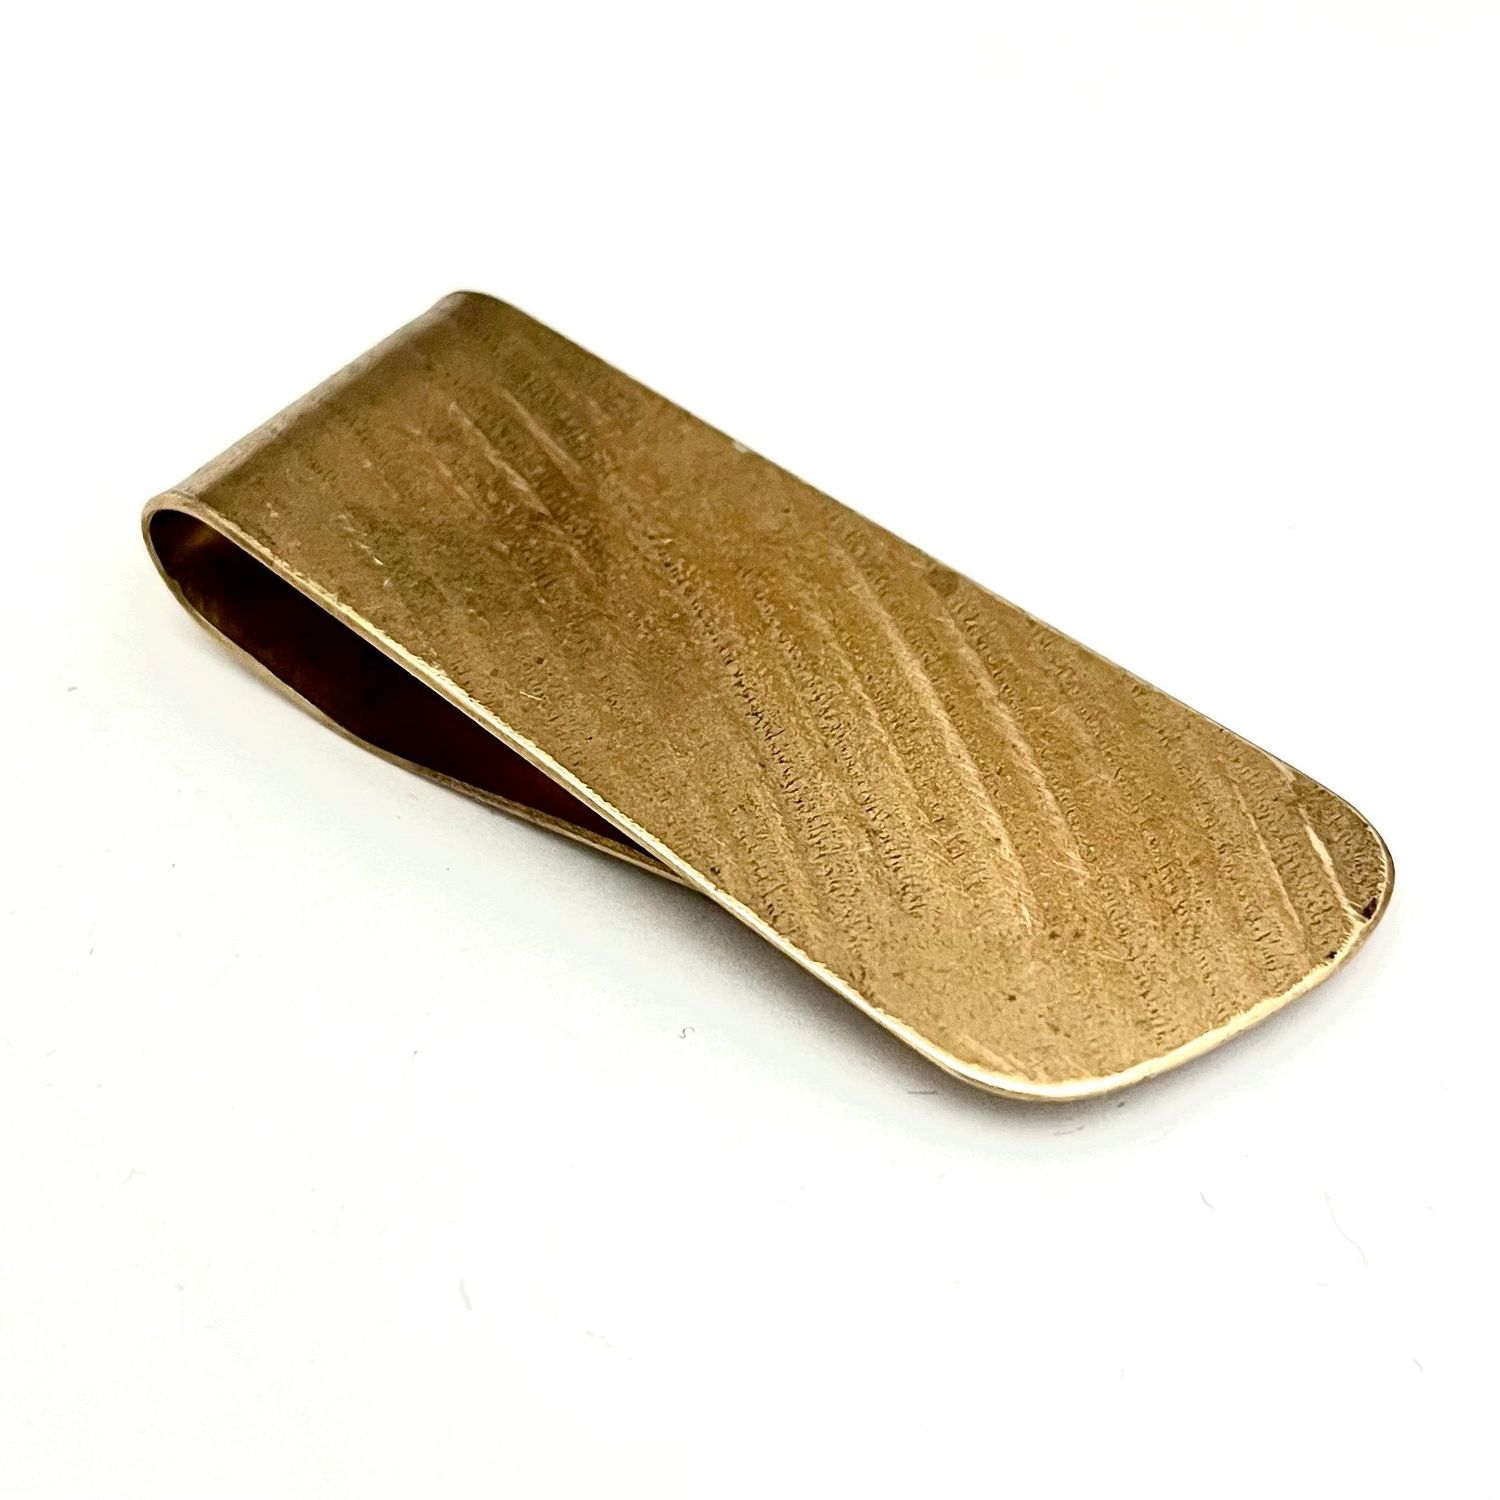 Cymbal Money Clips